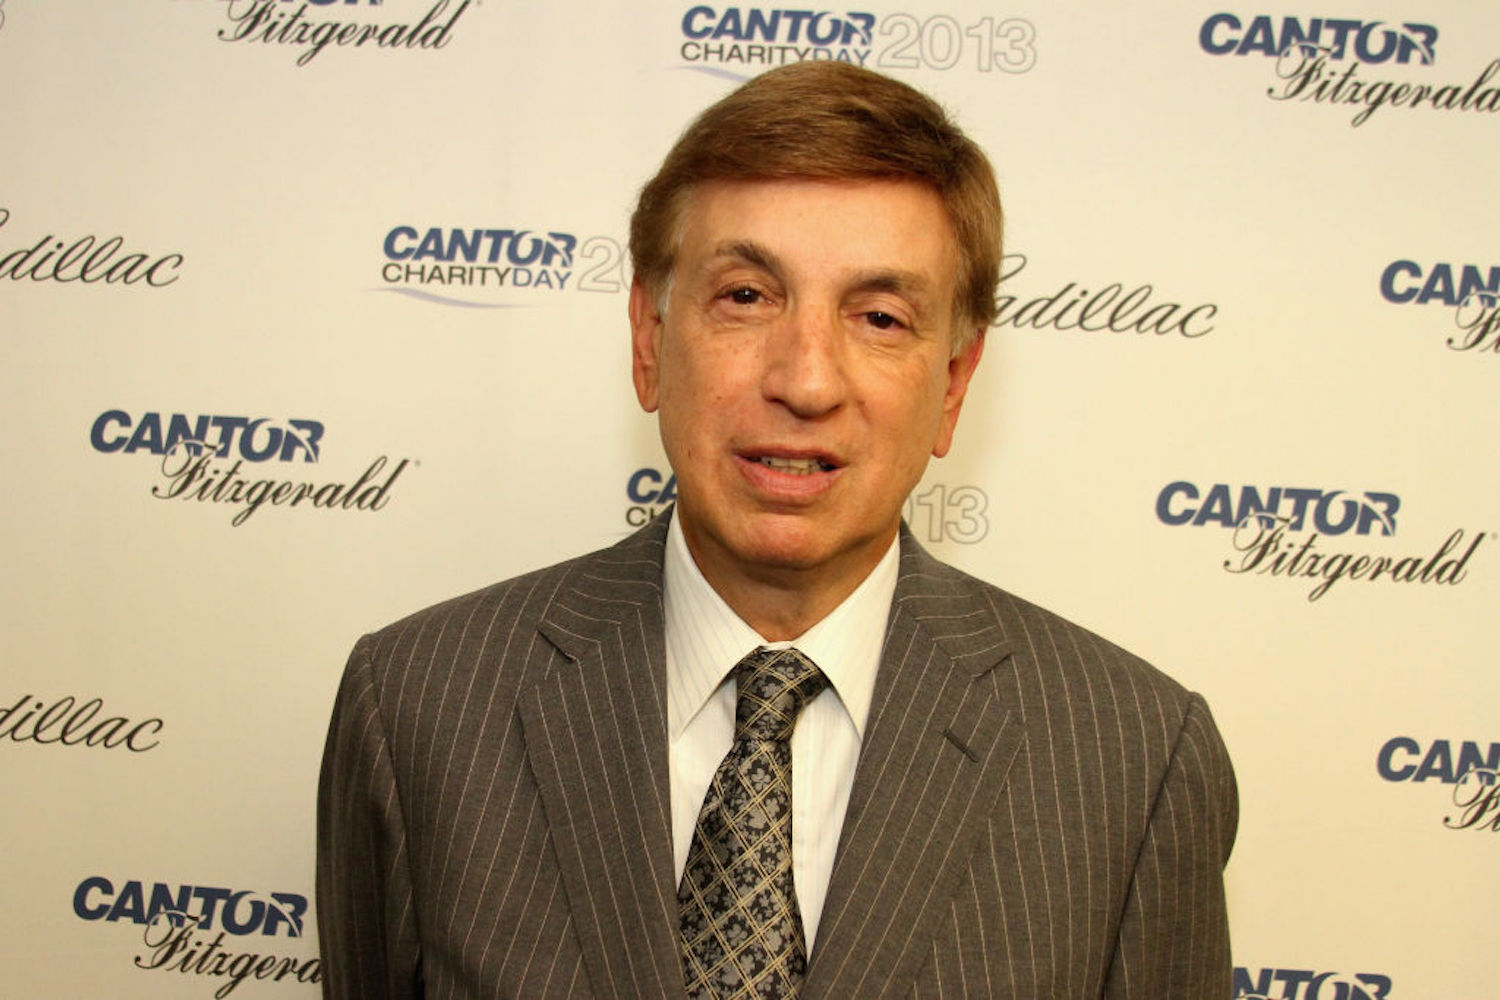 Marv Albert is still calling NBA games 23 years after he pled guilty to assault and battery in bizarre sex case.